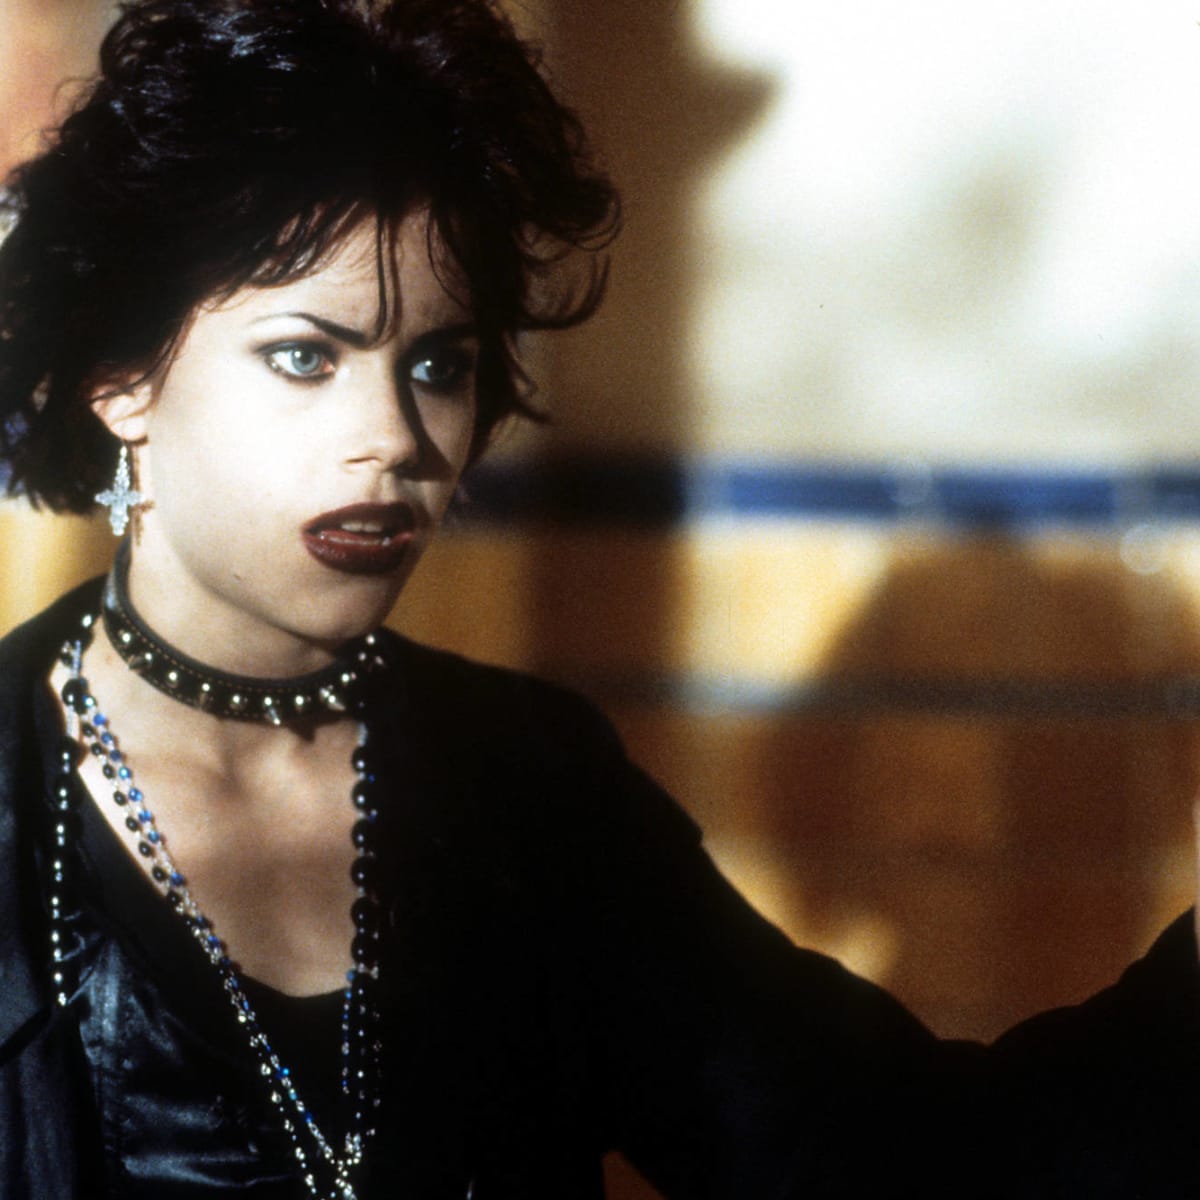 Paint it black: 20 best goths from movies, TV and music